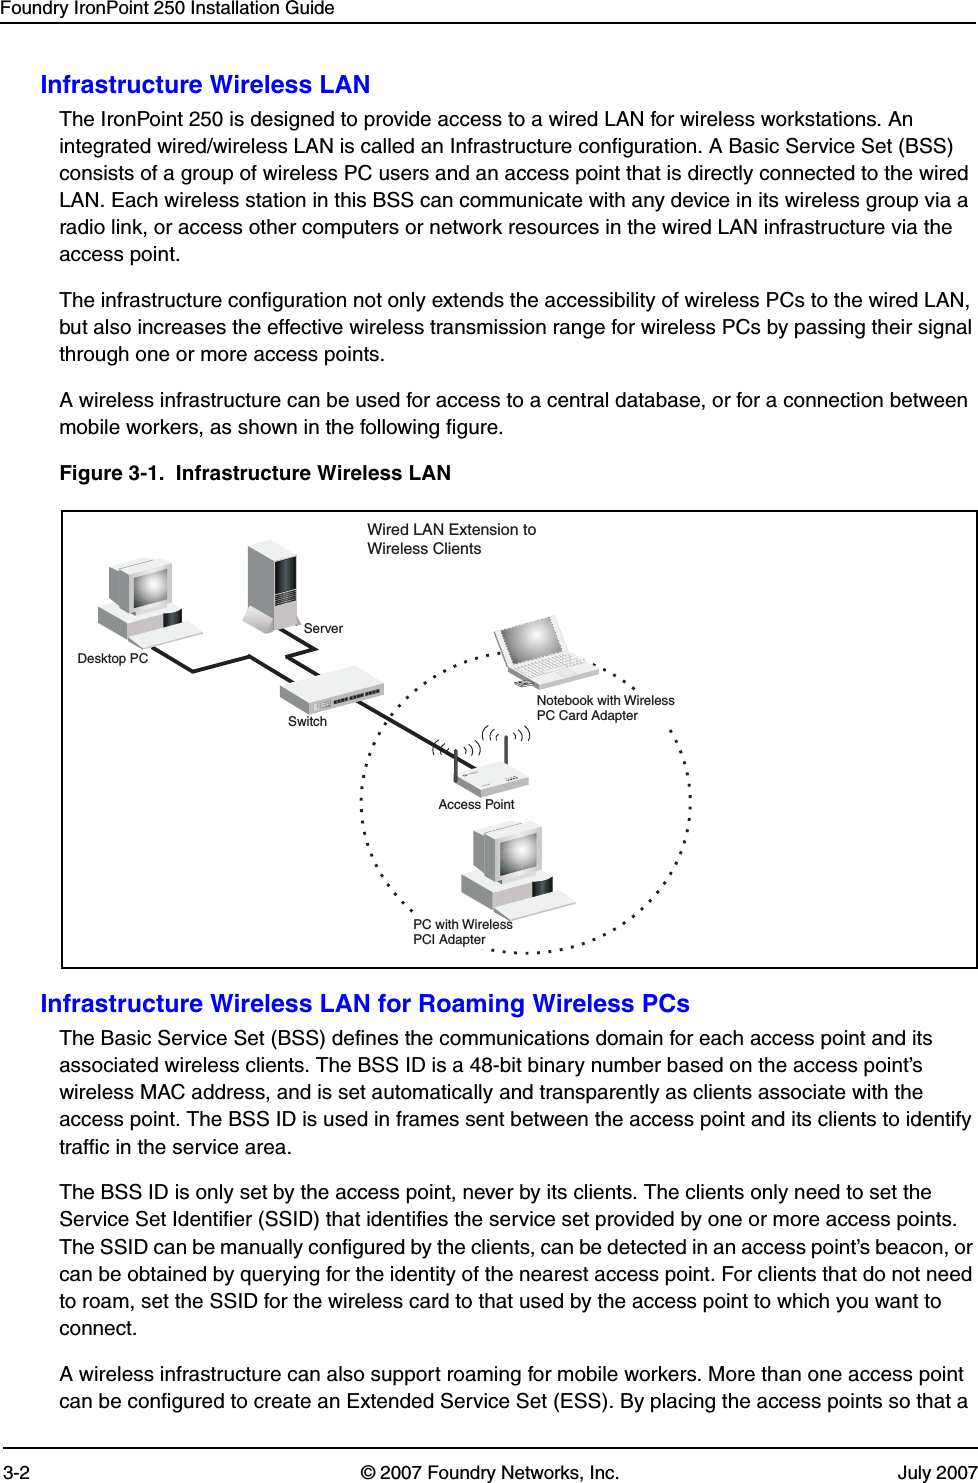 Foundry IronPoint 250 Installation Guide3-2 © 2007 Foundry Networks, Inc. July 2007Infrastructure Wireless LANThe IronPoint 250 is designed to provide access to a wired LAN for wireless workstations. An integrated wired/wireless LAN is called an Infrastructure configuration. A Basic Service Set (BSS) consists of a group of wireless PC users and an access point that is directly connected to the wired LAN. Each wireless station in this BSS can communicate with any device in its wireless group via a radio link, or access other computers or network resources in the wired LAN infrastructure via the access point.The infrastructure configuration not only extends the accessibility of wireless PCs to the wired LAN, but also increases the effective wireless transmission range for wireless PCs by passing their signal through one or more access points.A wireless infrastructure can be used for access to a central database, or for a connection between mobile workers, as shown in the following figure.Figure 3-1.  Infrastructure Wireless LANInfrastructure Wireless LAN for Roaming Wireless PCsThe Basic Service Set (BSS) defines the communications domain for each access point and its associated wireless clients. The BSS ID is a 48-bit binary number based on the access point’s wireless MAC address, and is set automatically and transparently as clients associate with the access point. The BSS ID is used in frames sent between the access point and its clients to identify traffic in the service area. The BSS ID is only set by the access point, never by its clients. The clients only need to set the Service Set Identifier (SSID) that identifies the service set provided by one or more access points. The SSID can be manually configured by the clients, can be detected in an access point’s beacon, or can be obtained by querying for the identity of the nearest access point. For clients that do not need to roam, set the SSID for the wireless card to that used by the access point to which you want to connect.A wireless infrastructure can also support roaming for mobile workers. More than one access point can be configured to create an Extended Service Set (ESS). By placing the access points so that a ServerSwitchDesktop PCAccess PointPC with WirelessPCI AdapterNotebook with WirelessPC Card AdapterWired LAN Extension toWireless Clients